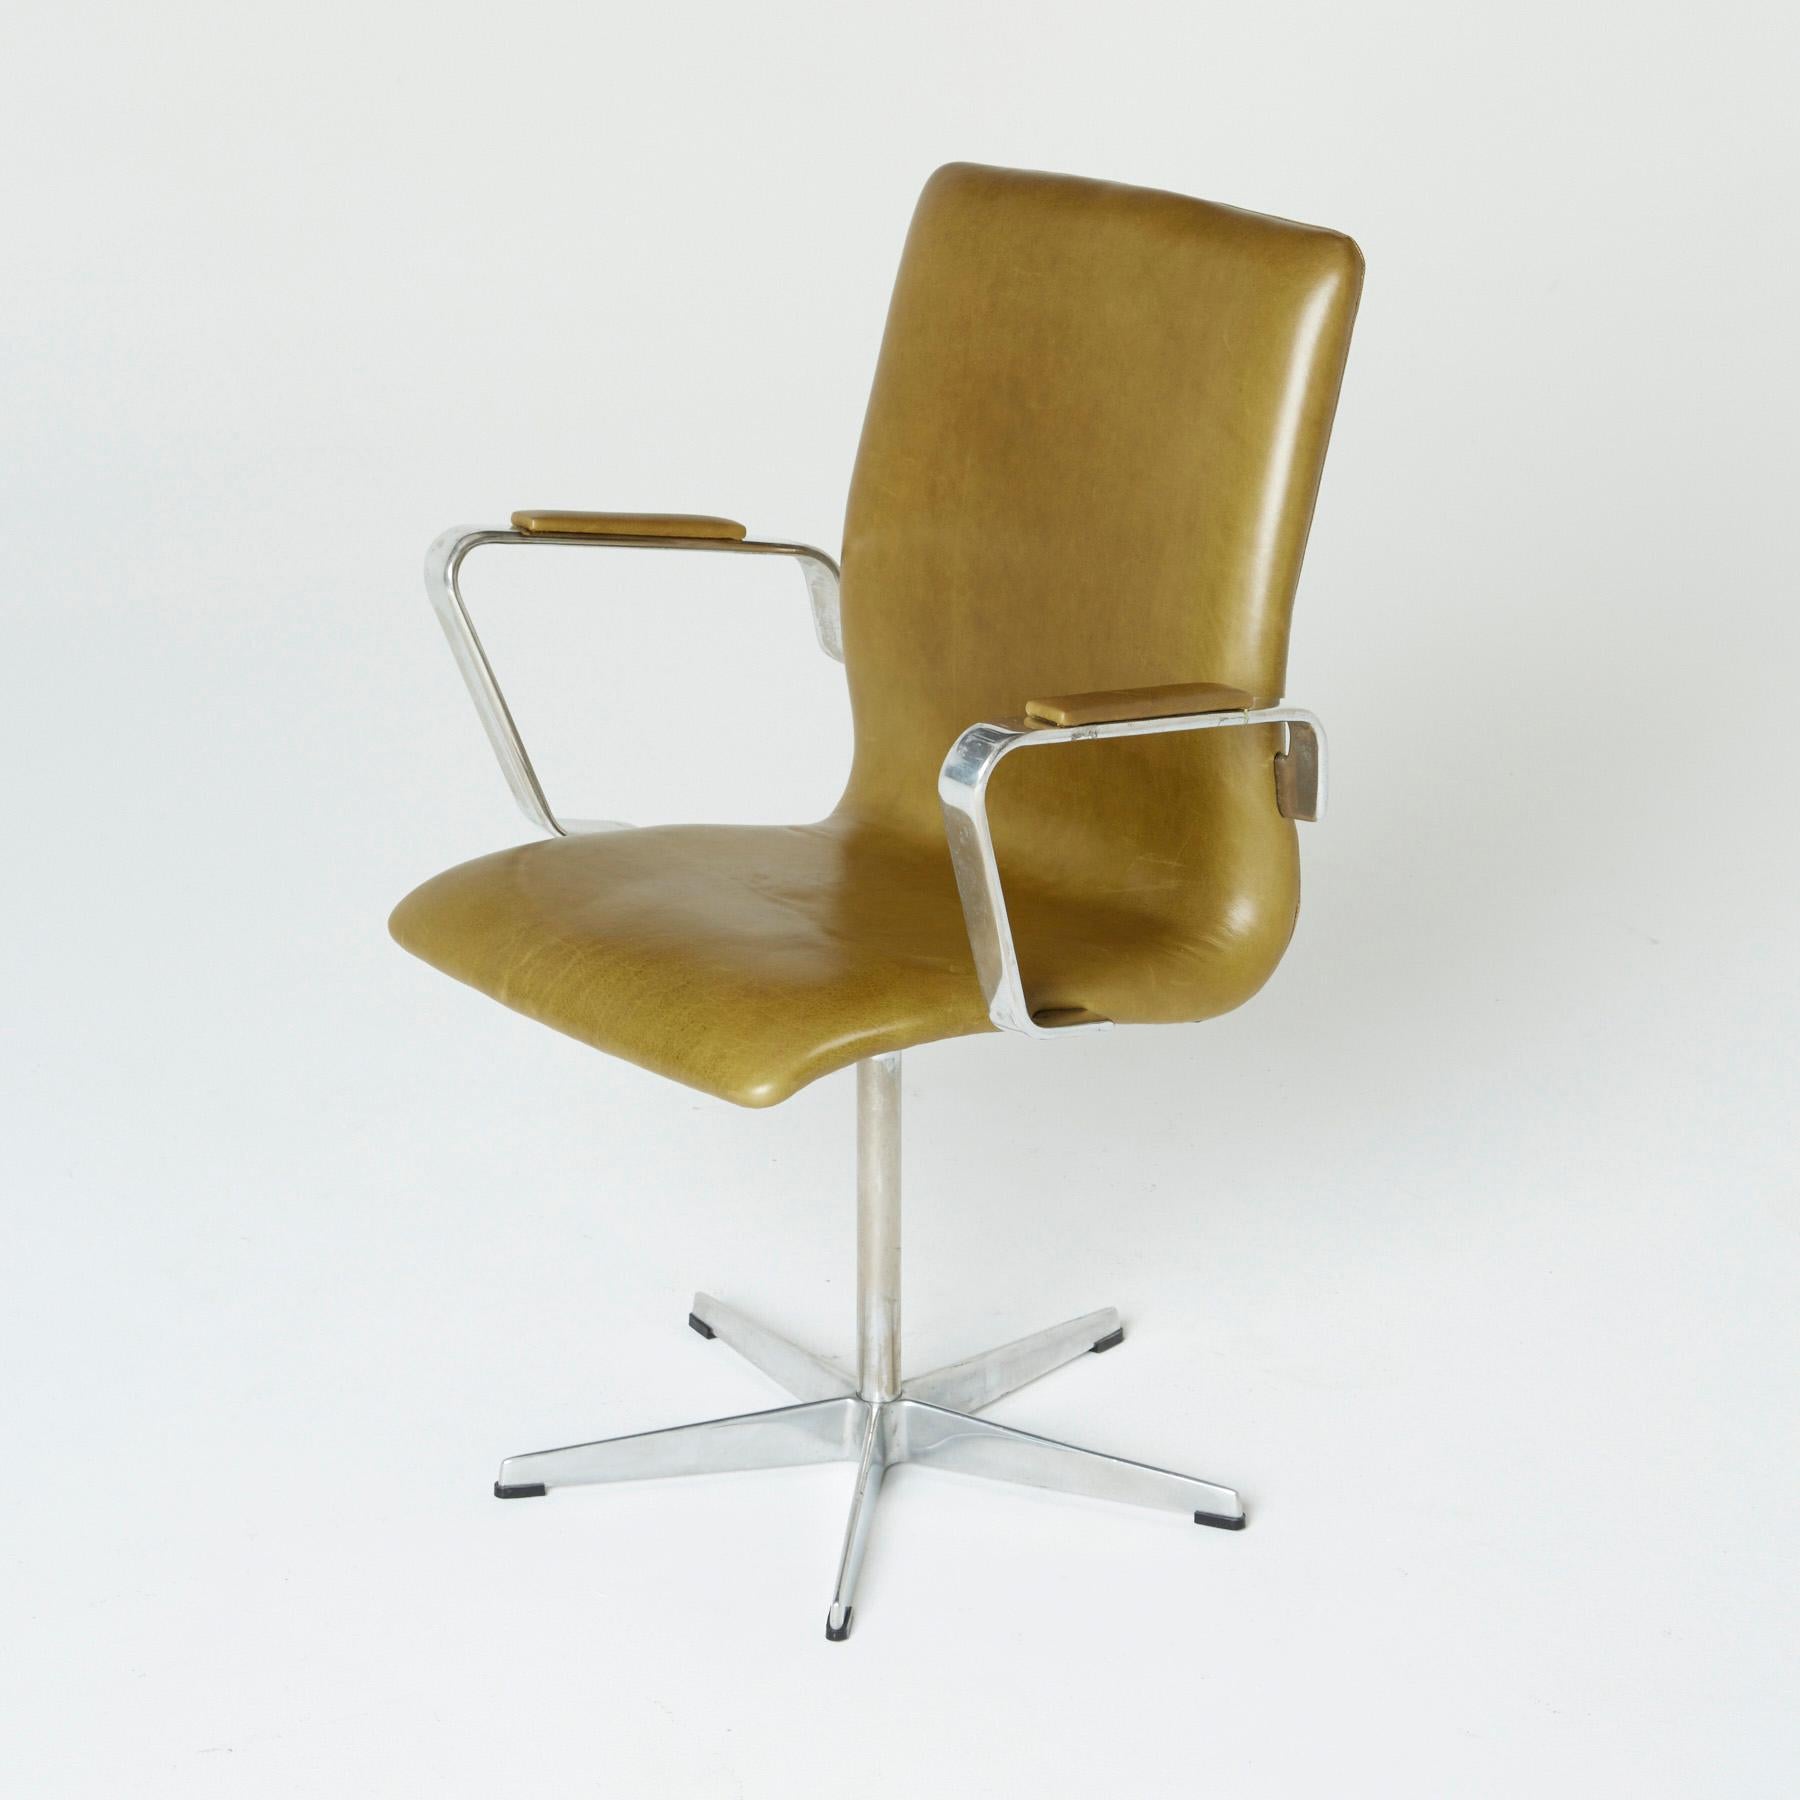 Leather 'Oxford' Swivel Chair by Arne Jacobsen for Fritz Hansen, 1973, Signed 4